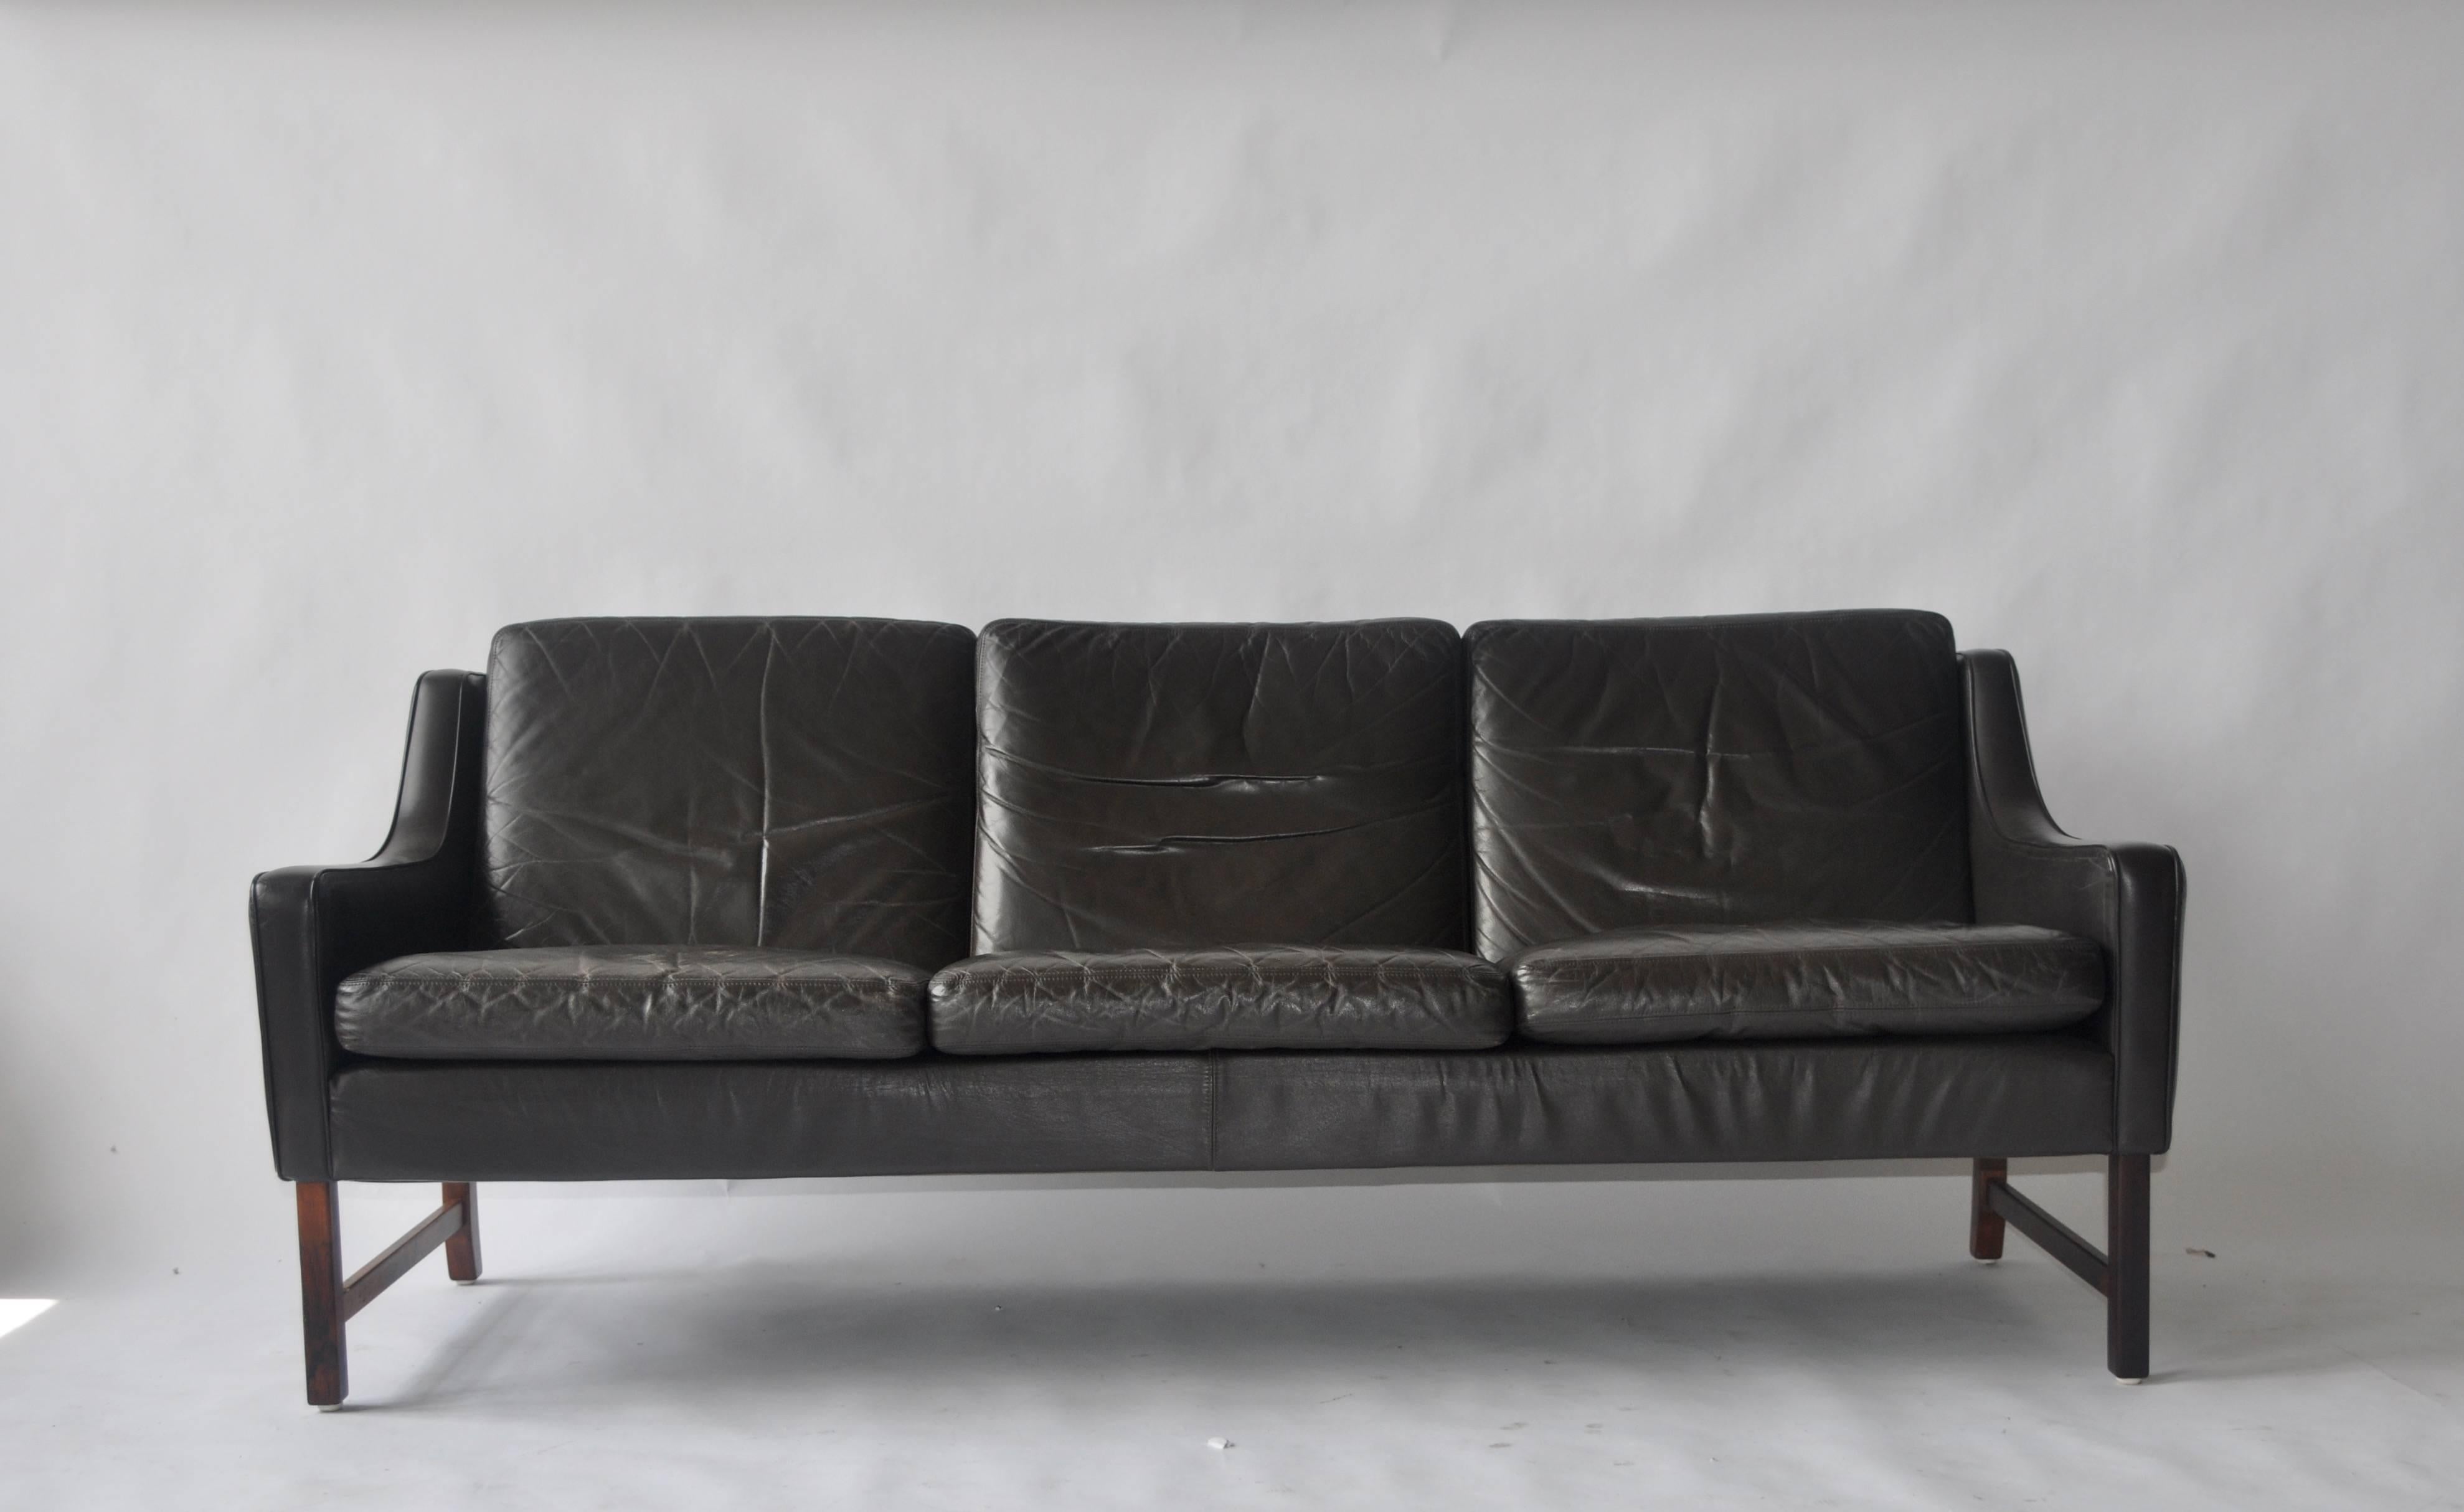 Fredrik Kayser leather and rosewood sofa.
Dark brown leather. Matching chairs available.